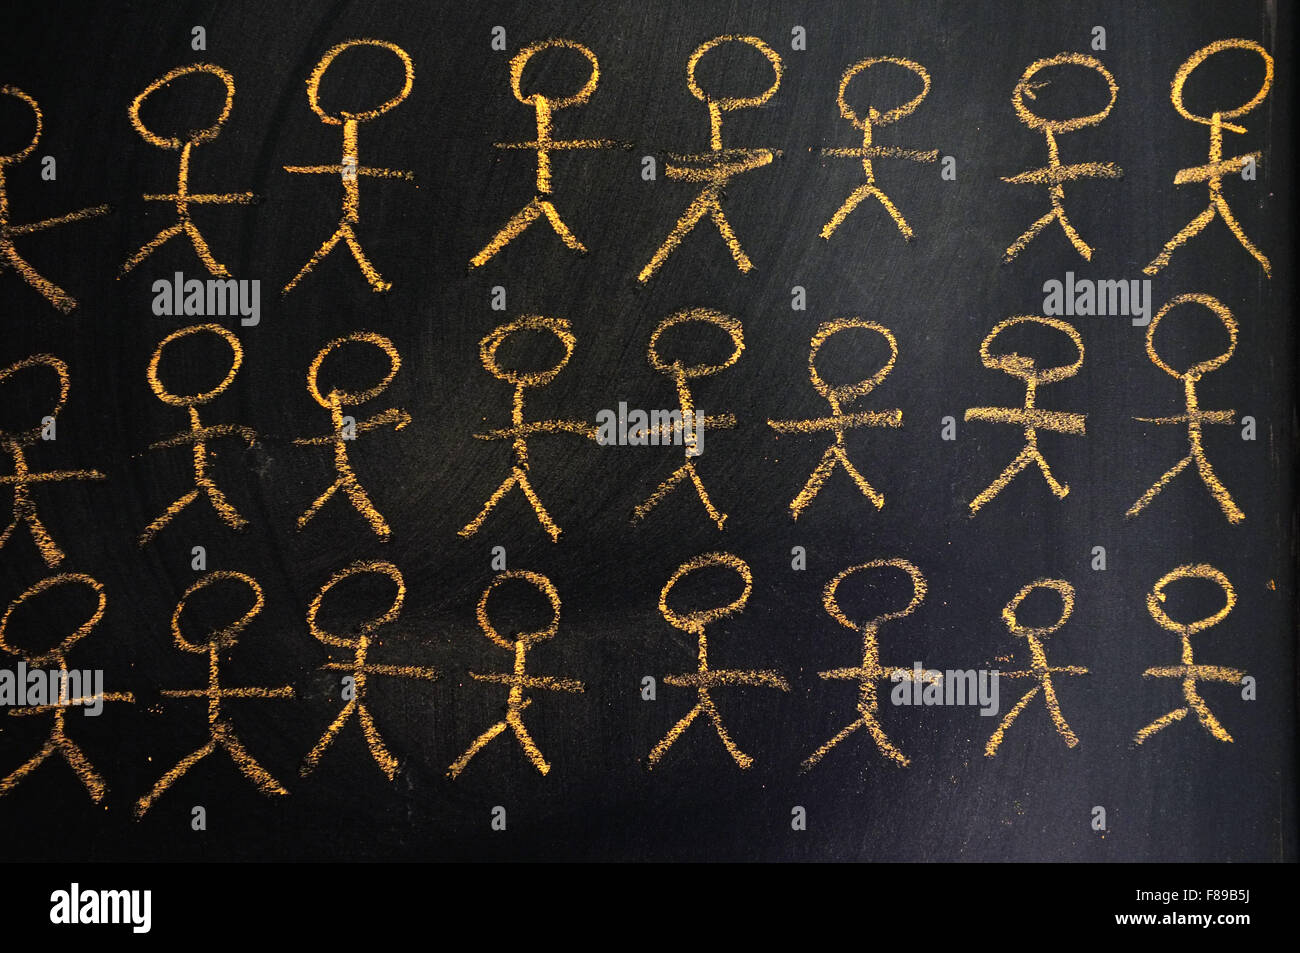 lots of stick people